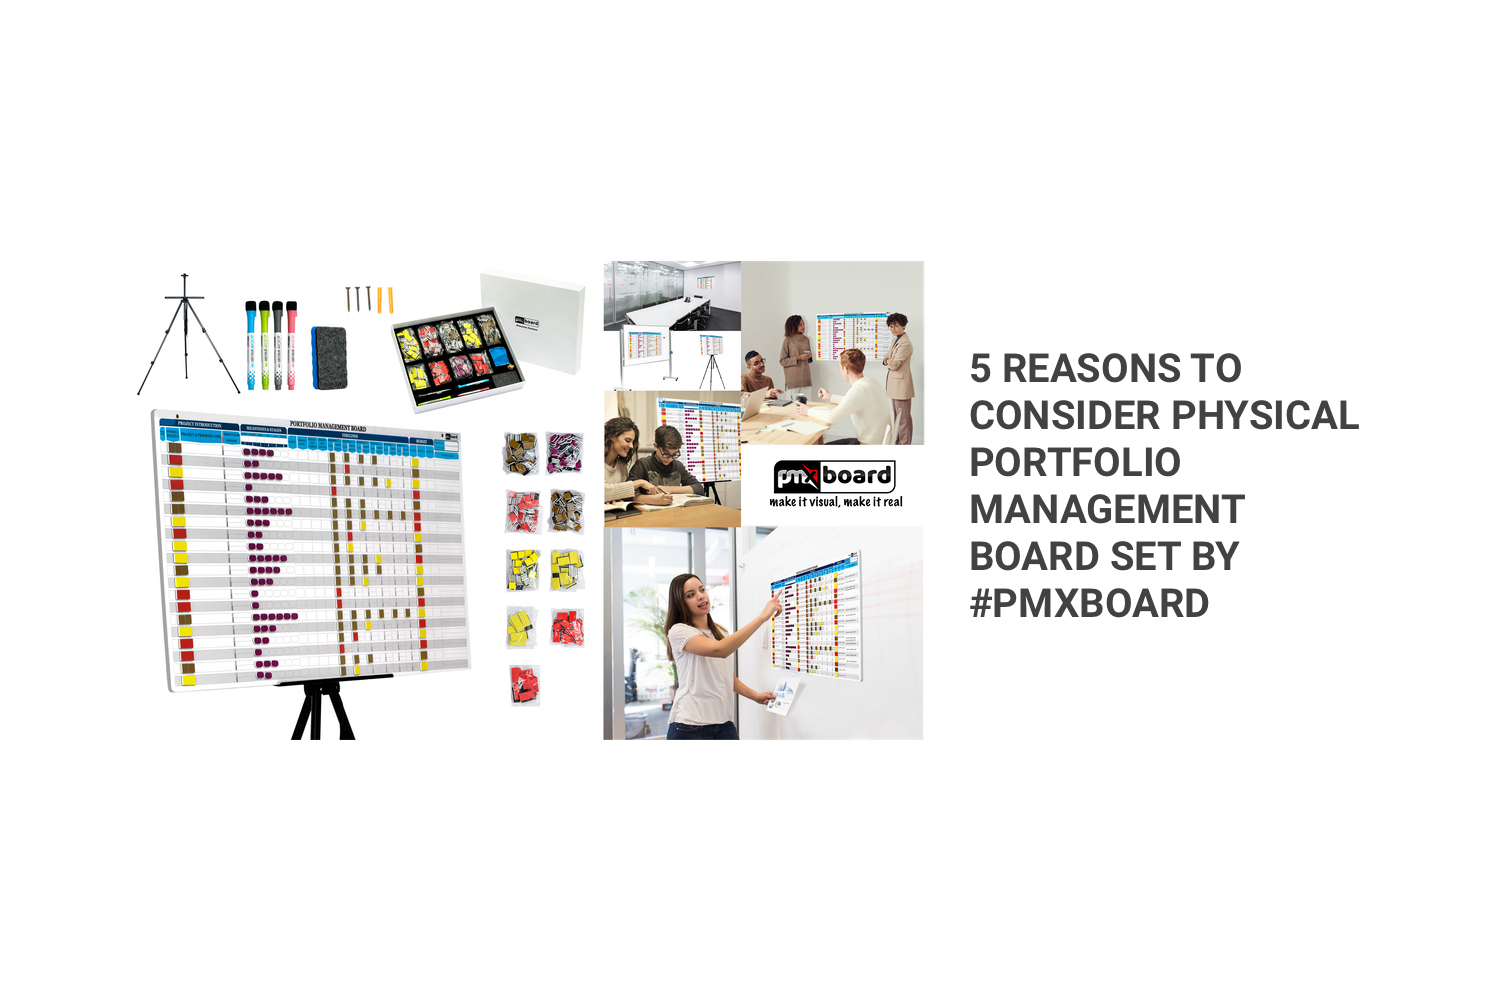 Reasons to consider Physical Kanban Board by pmxboard